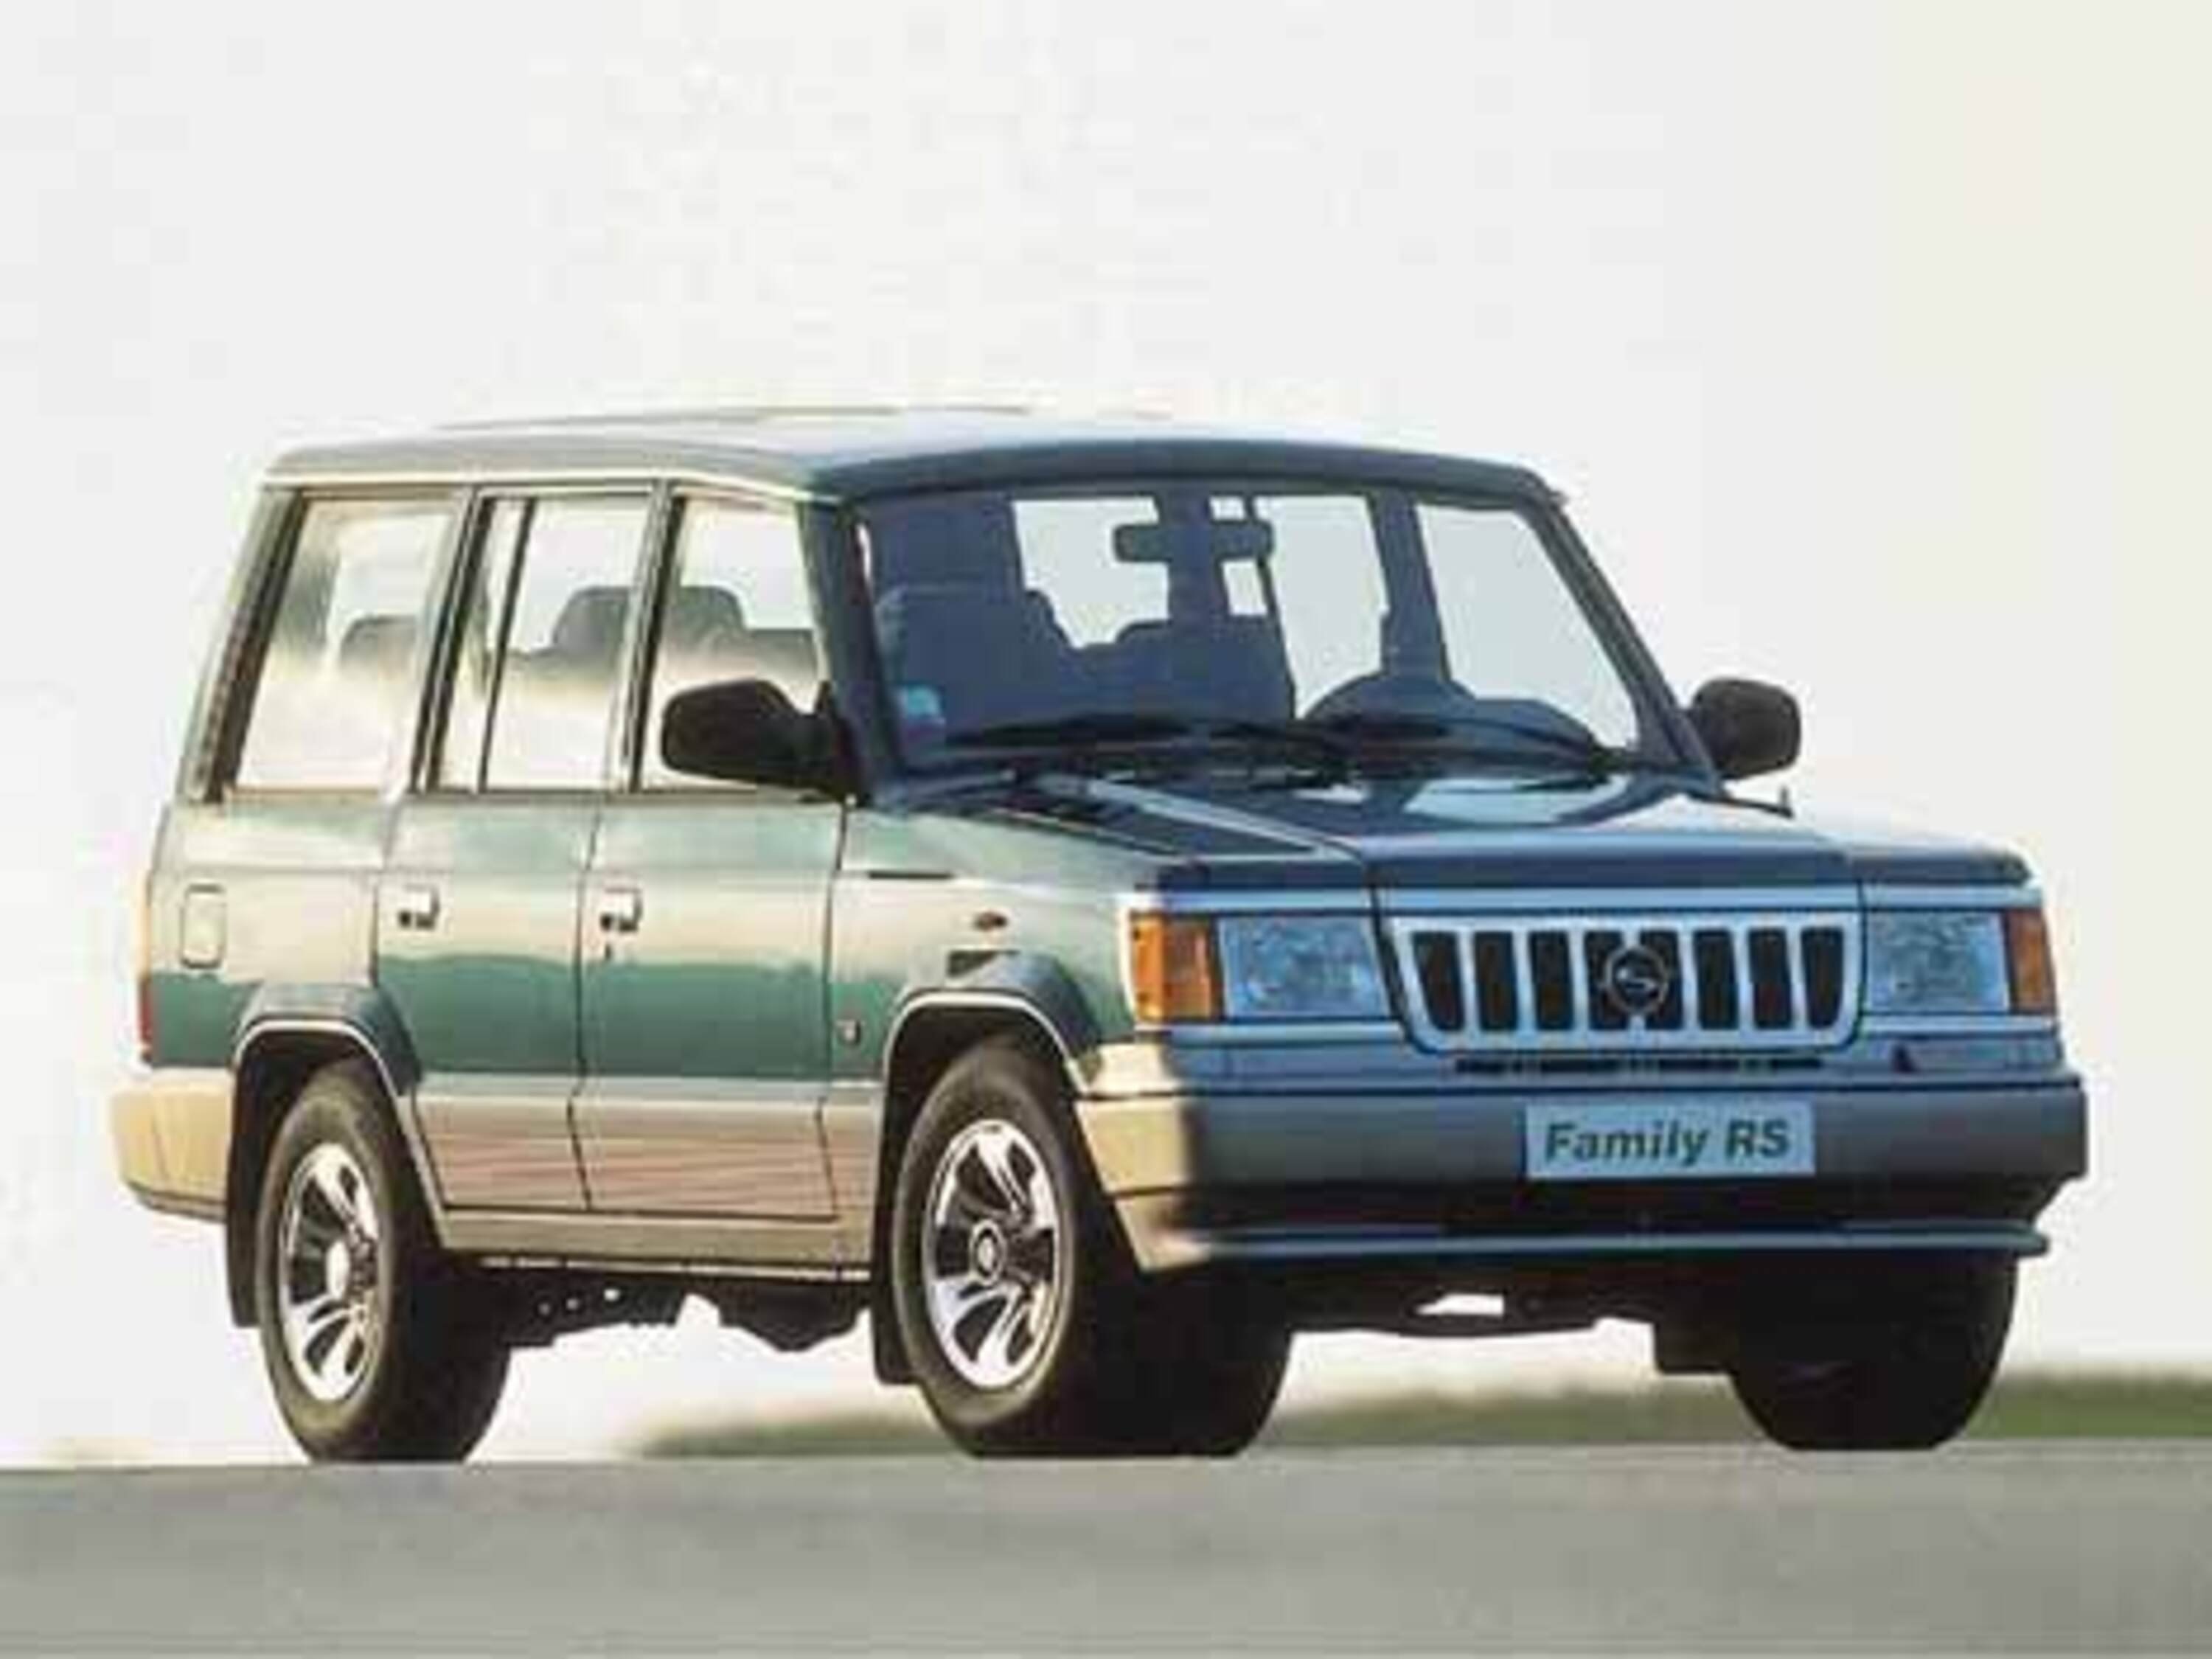 Ssangyong Family (1990-97)